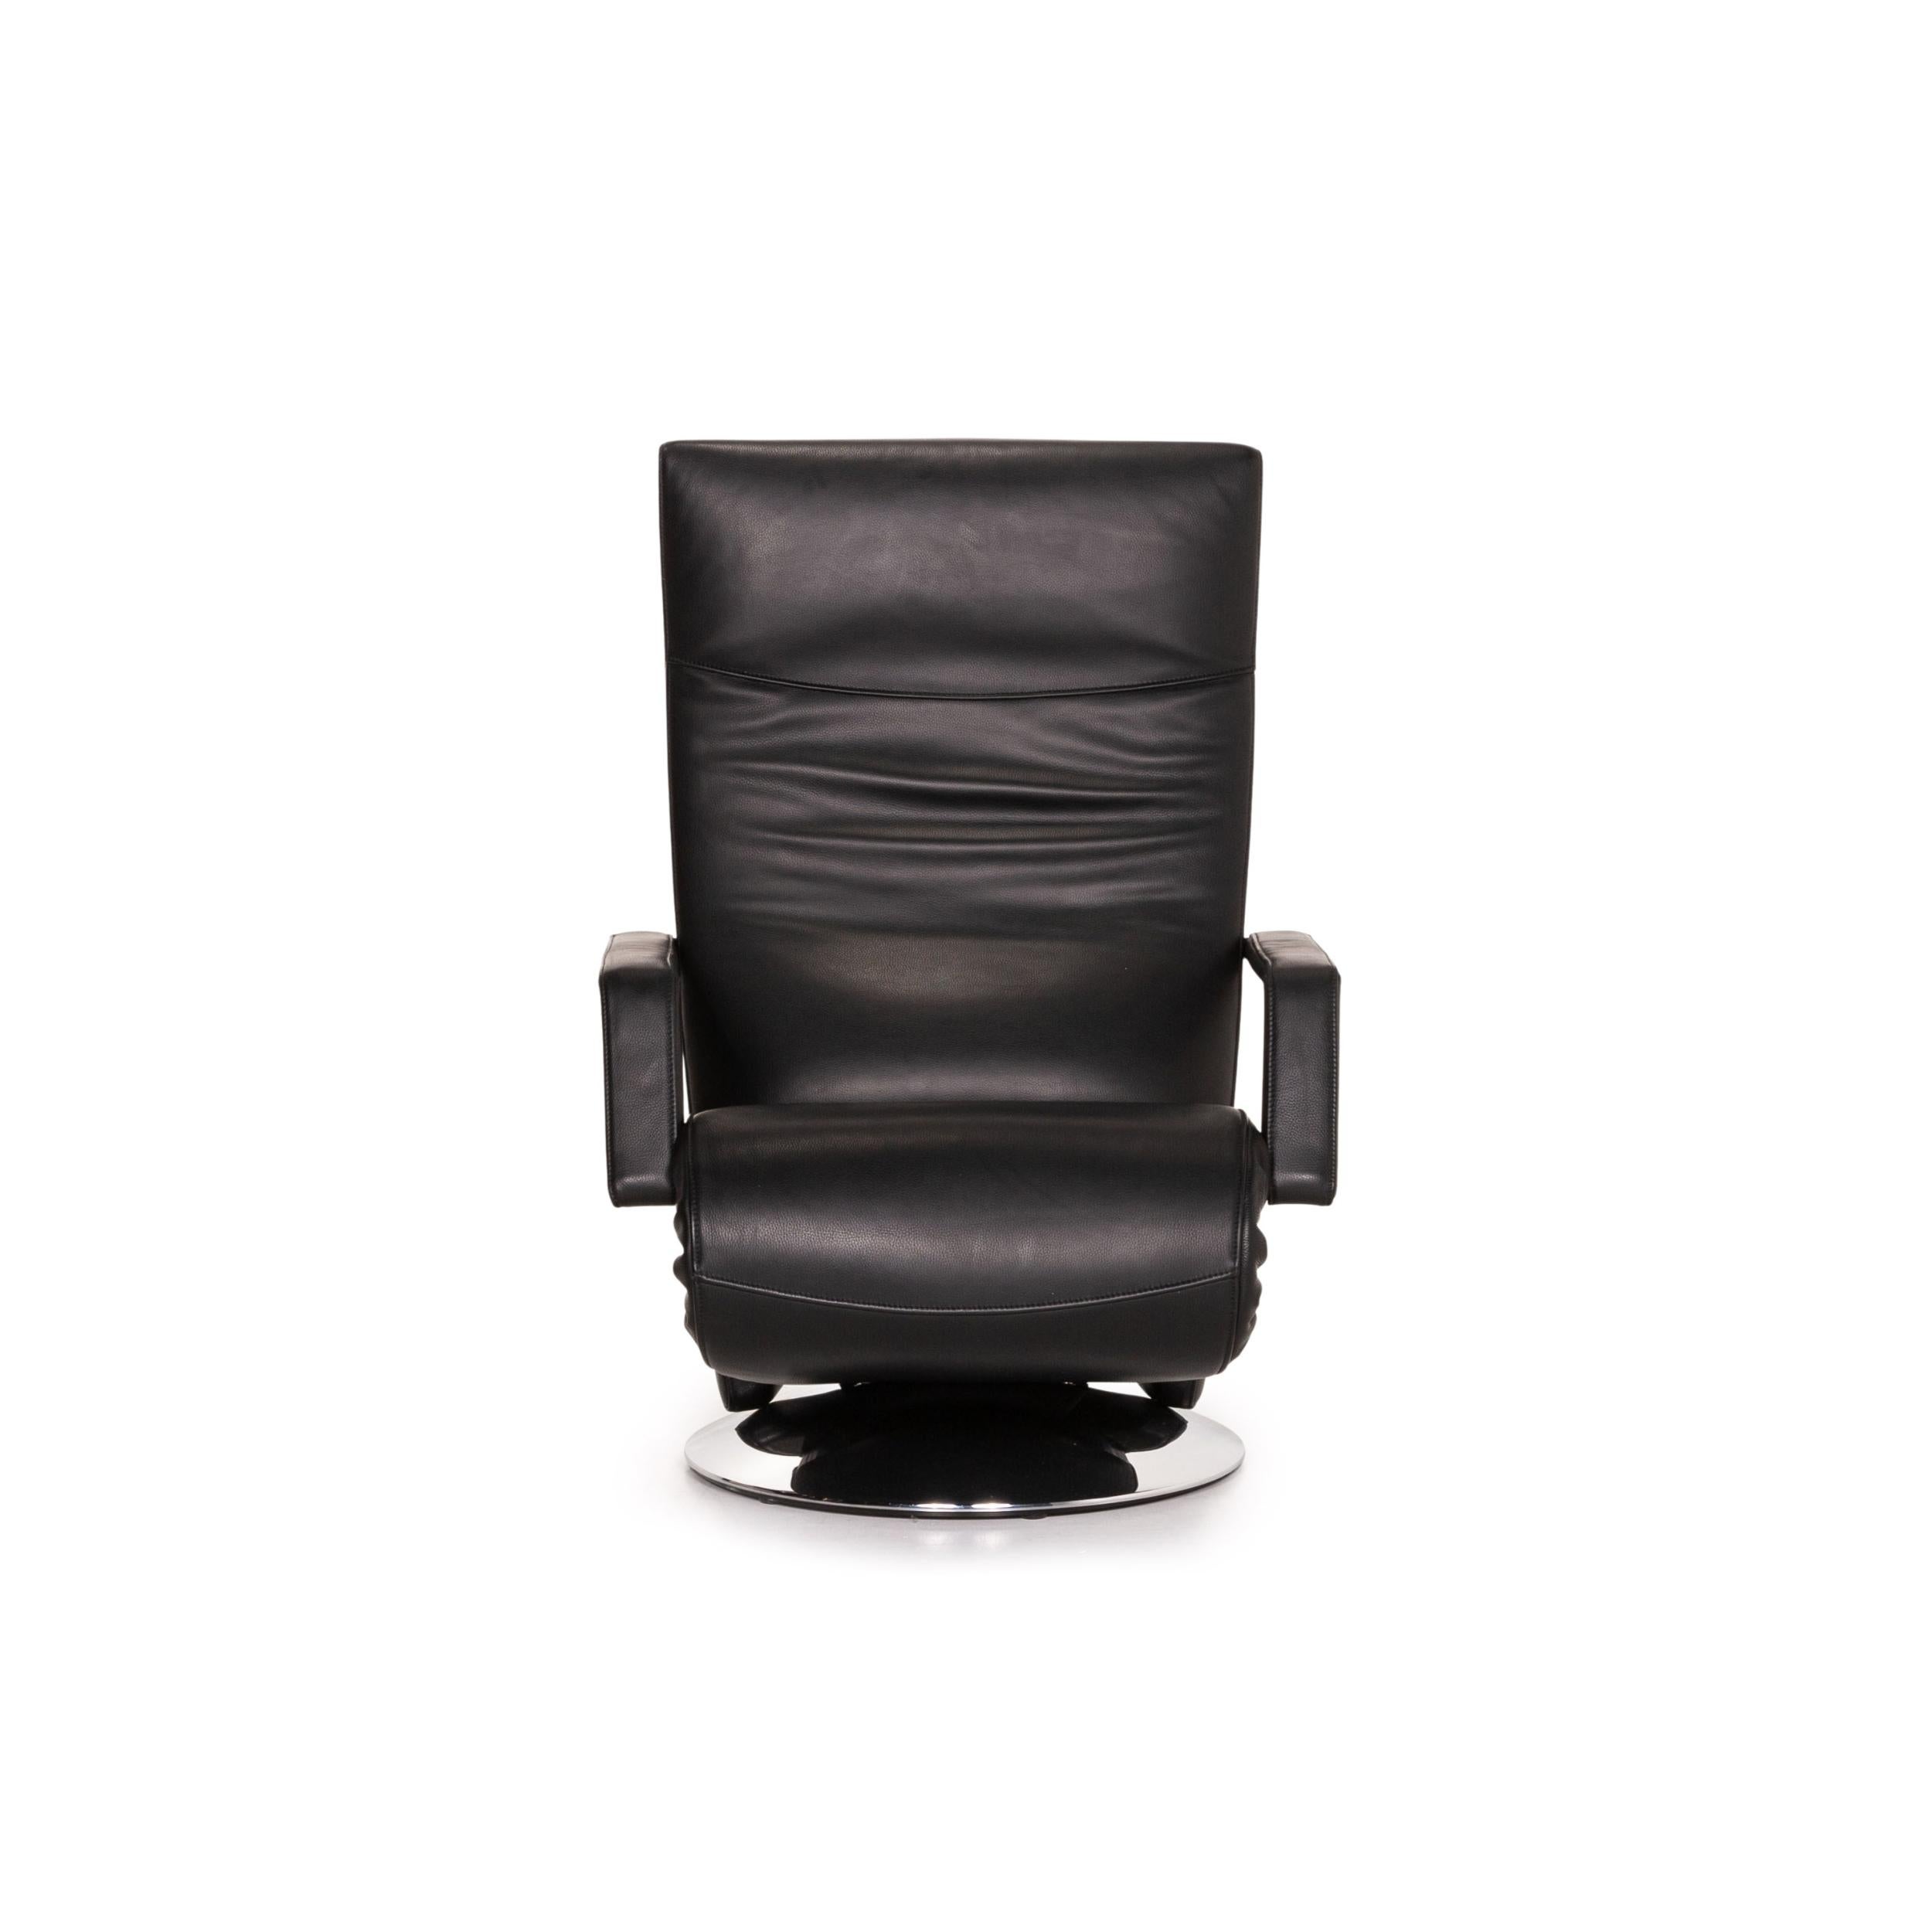 Fsm Evolo Leather Armchair Black Electrical Function Relax Function Recliner 1